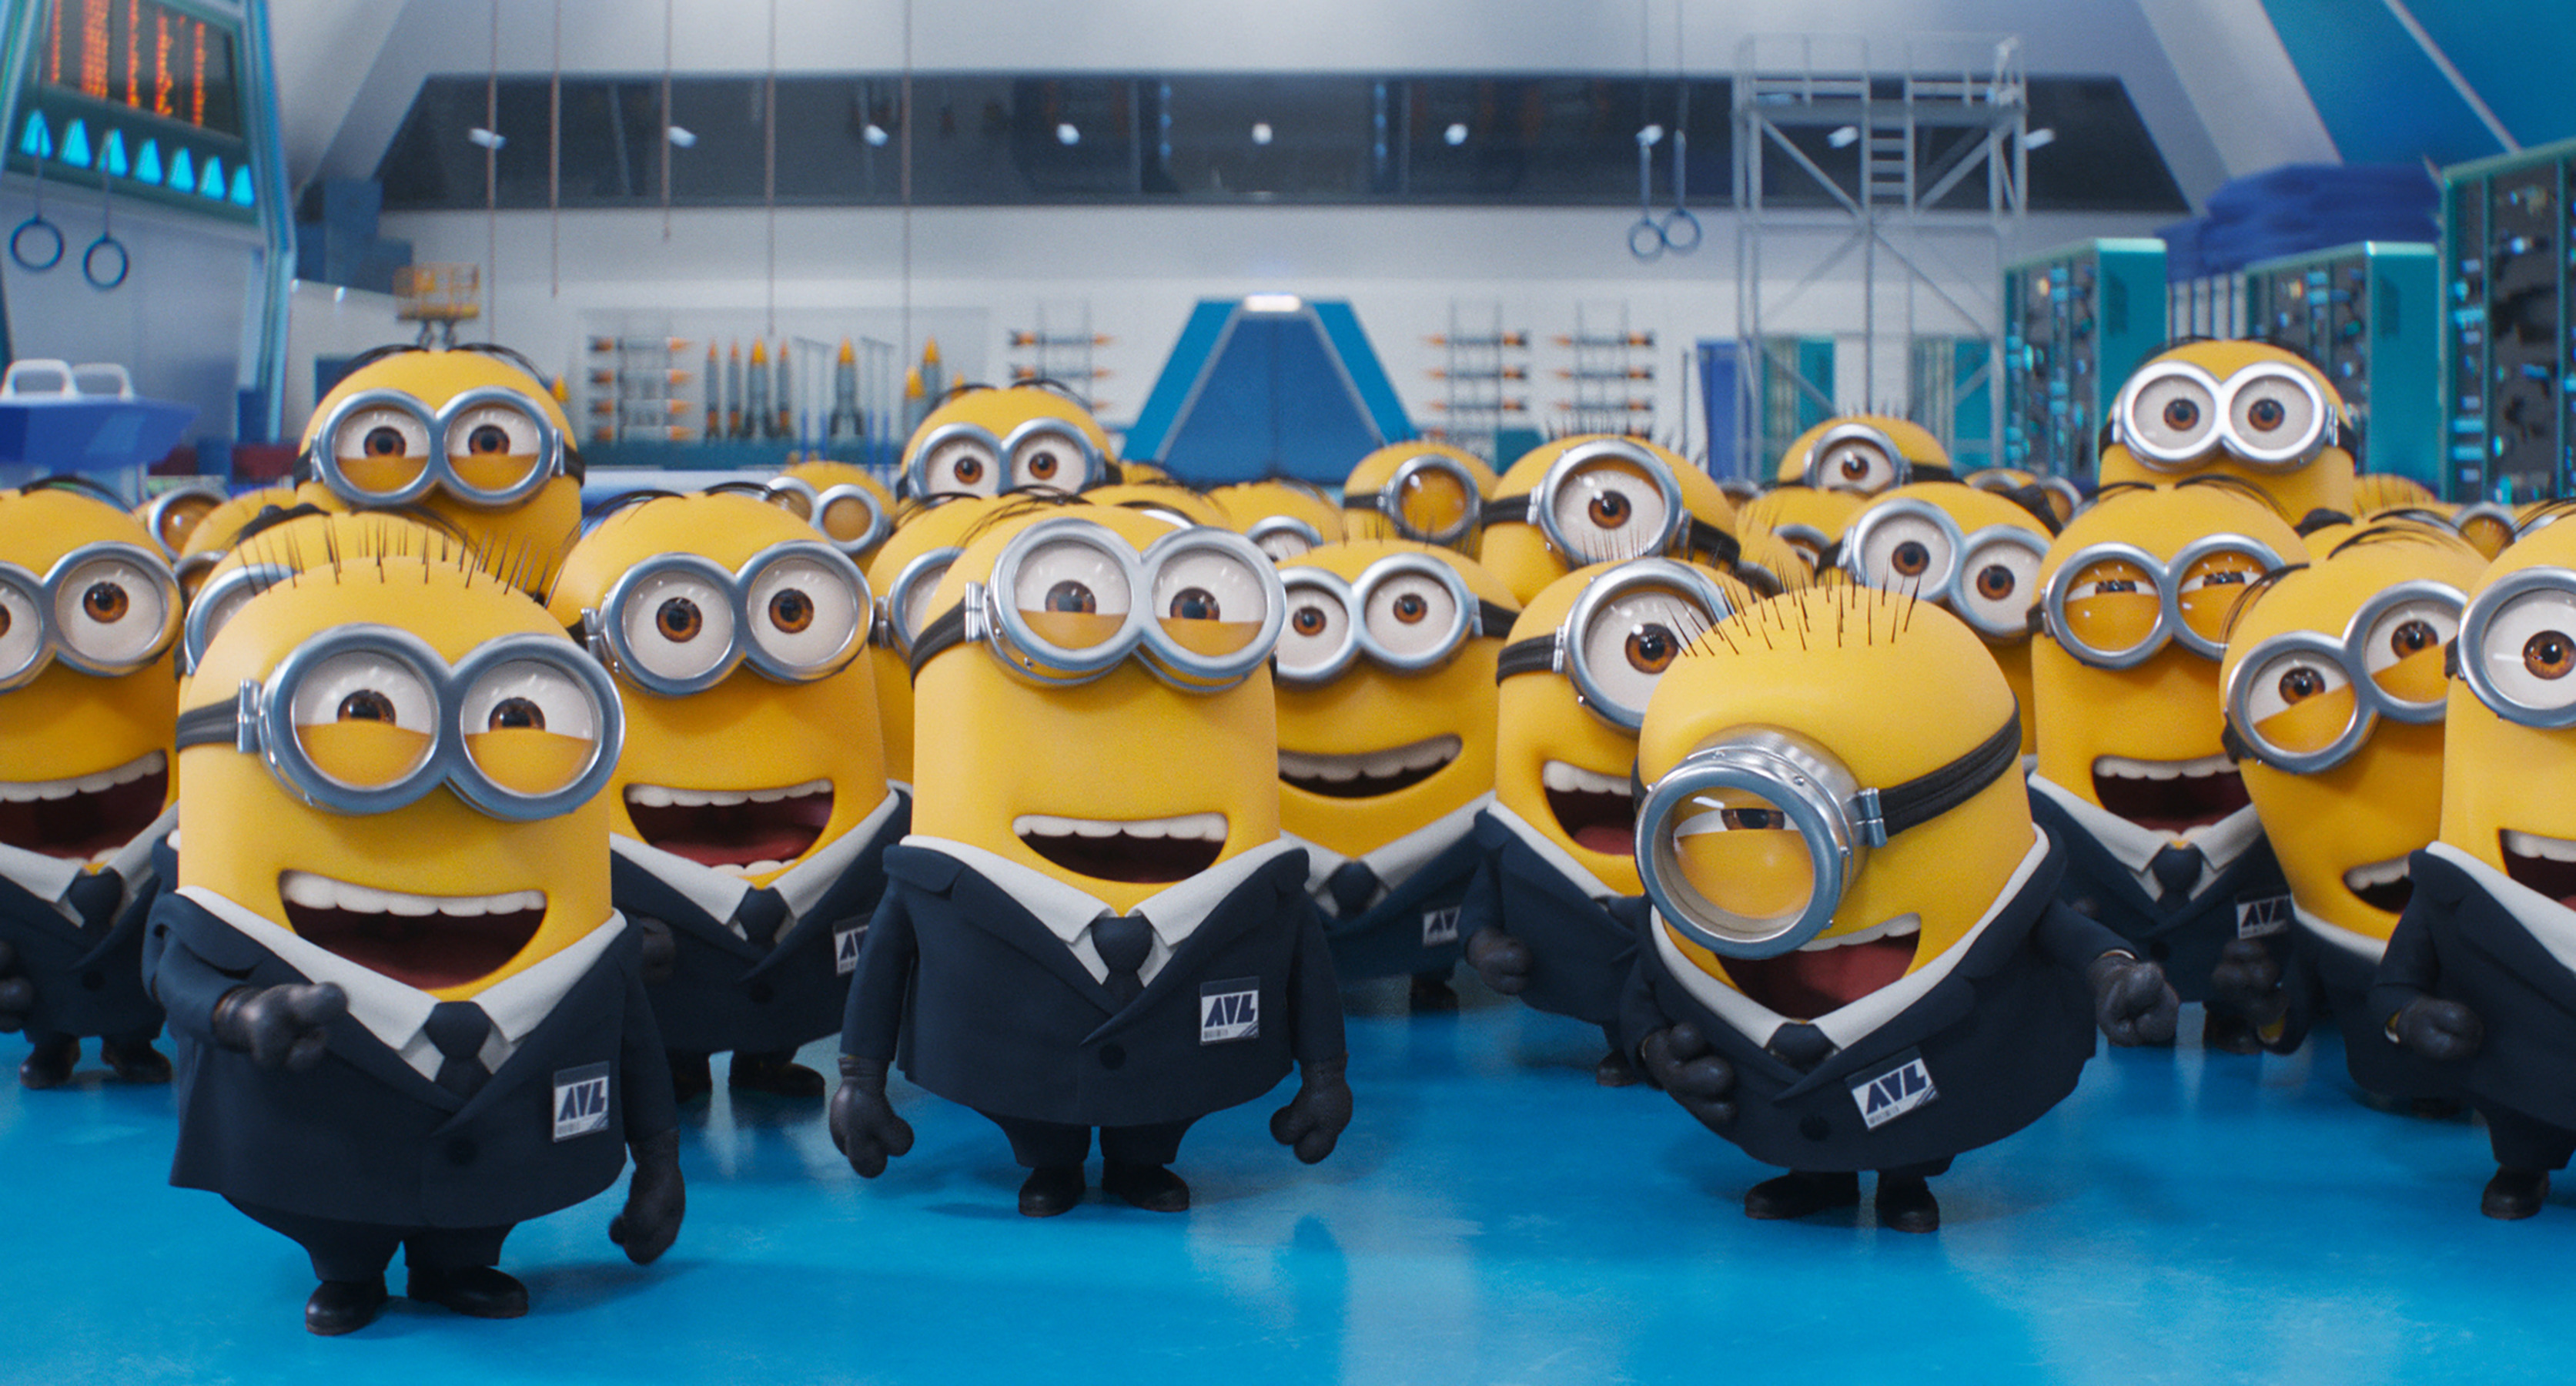 A group of Minions in suits and ties, laughing in an office